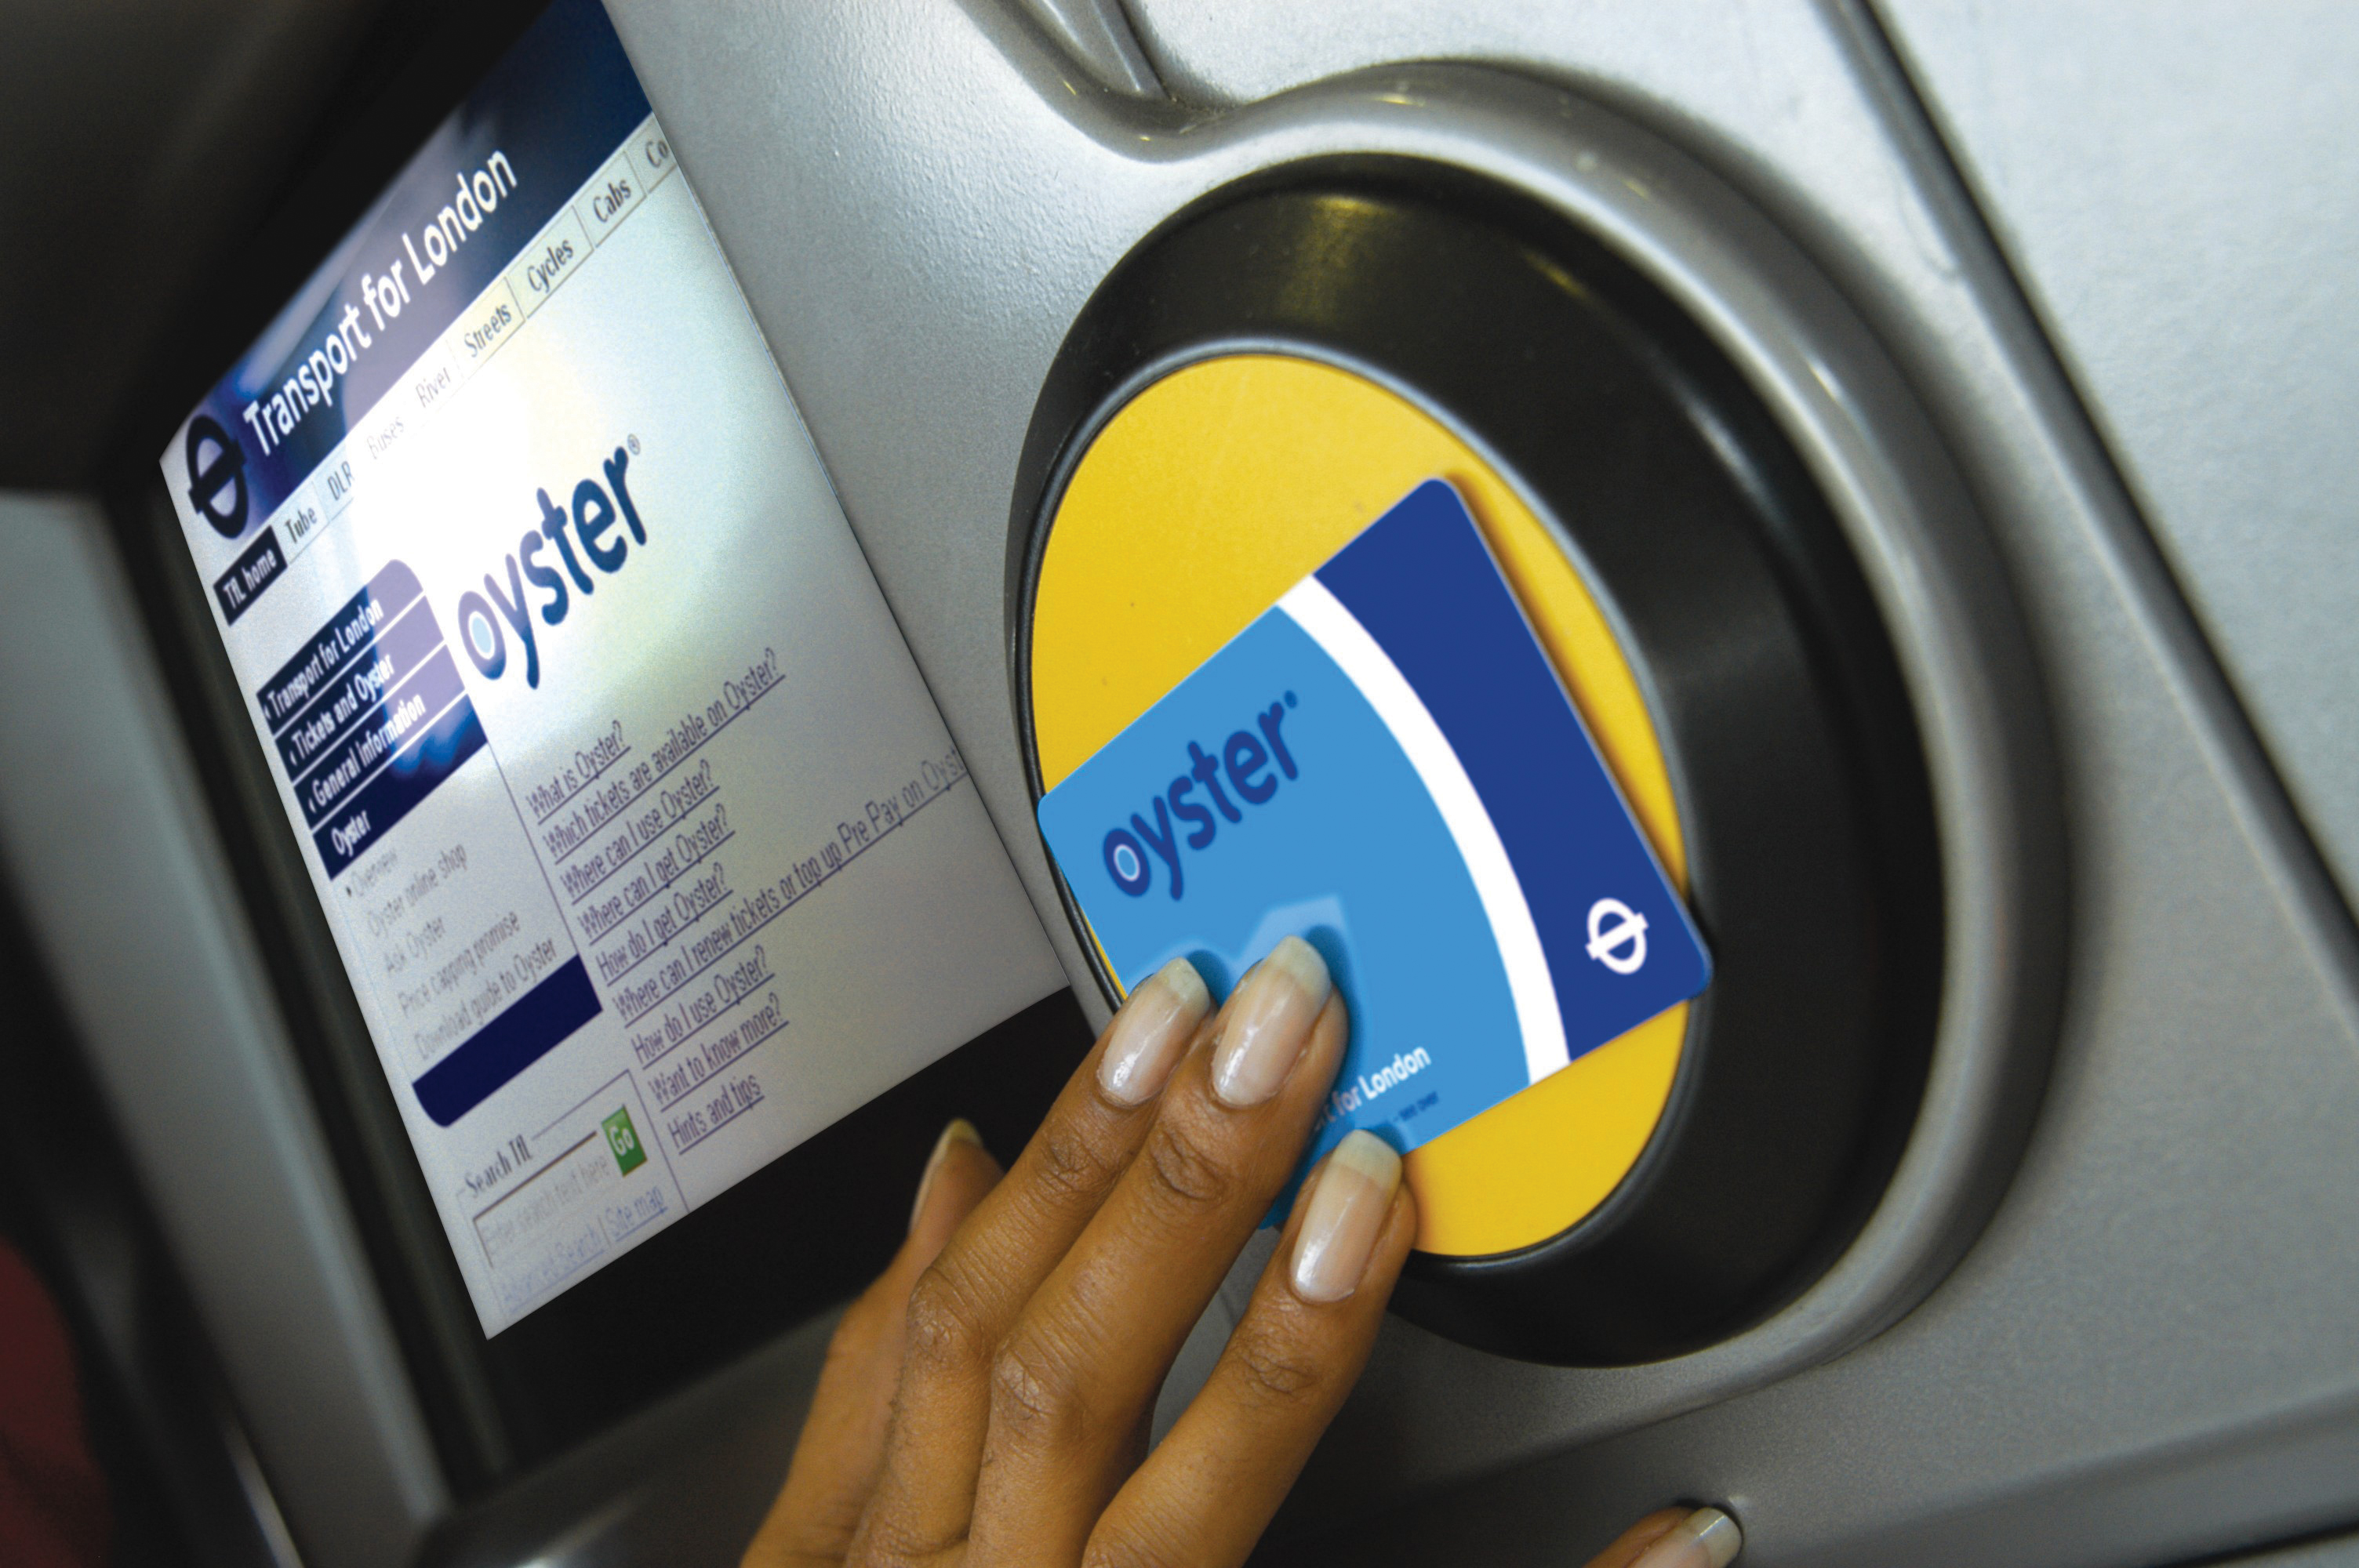 London's Oyster Card